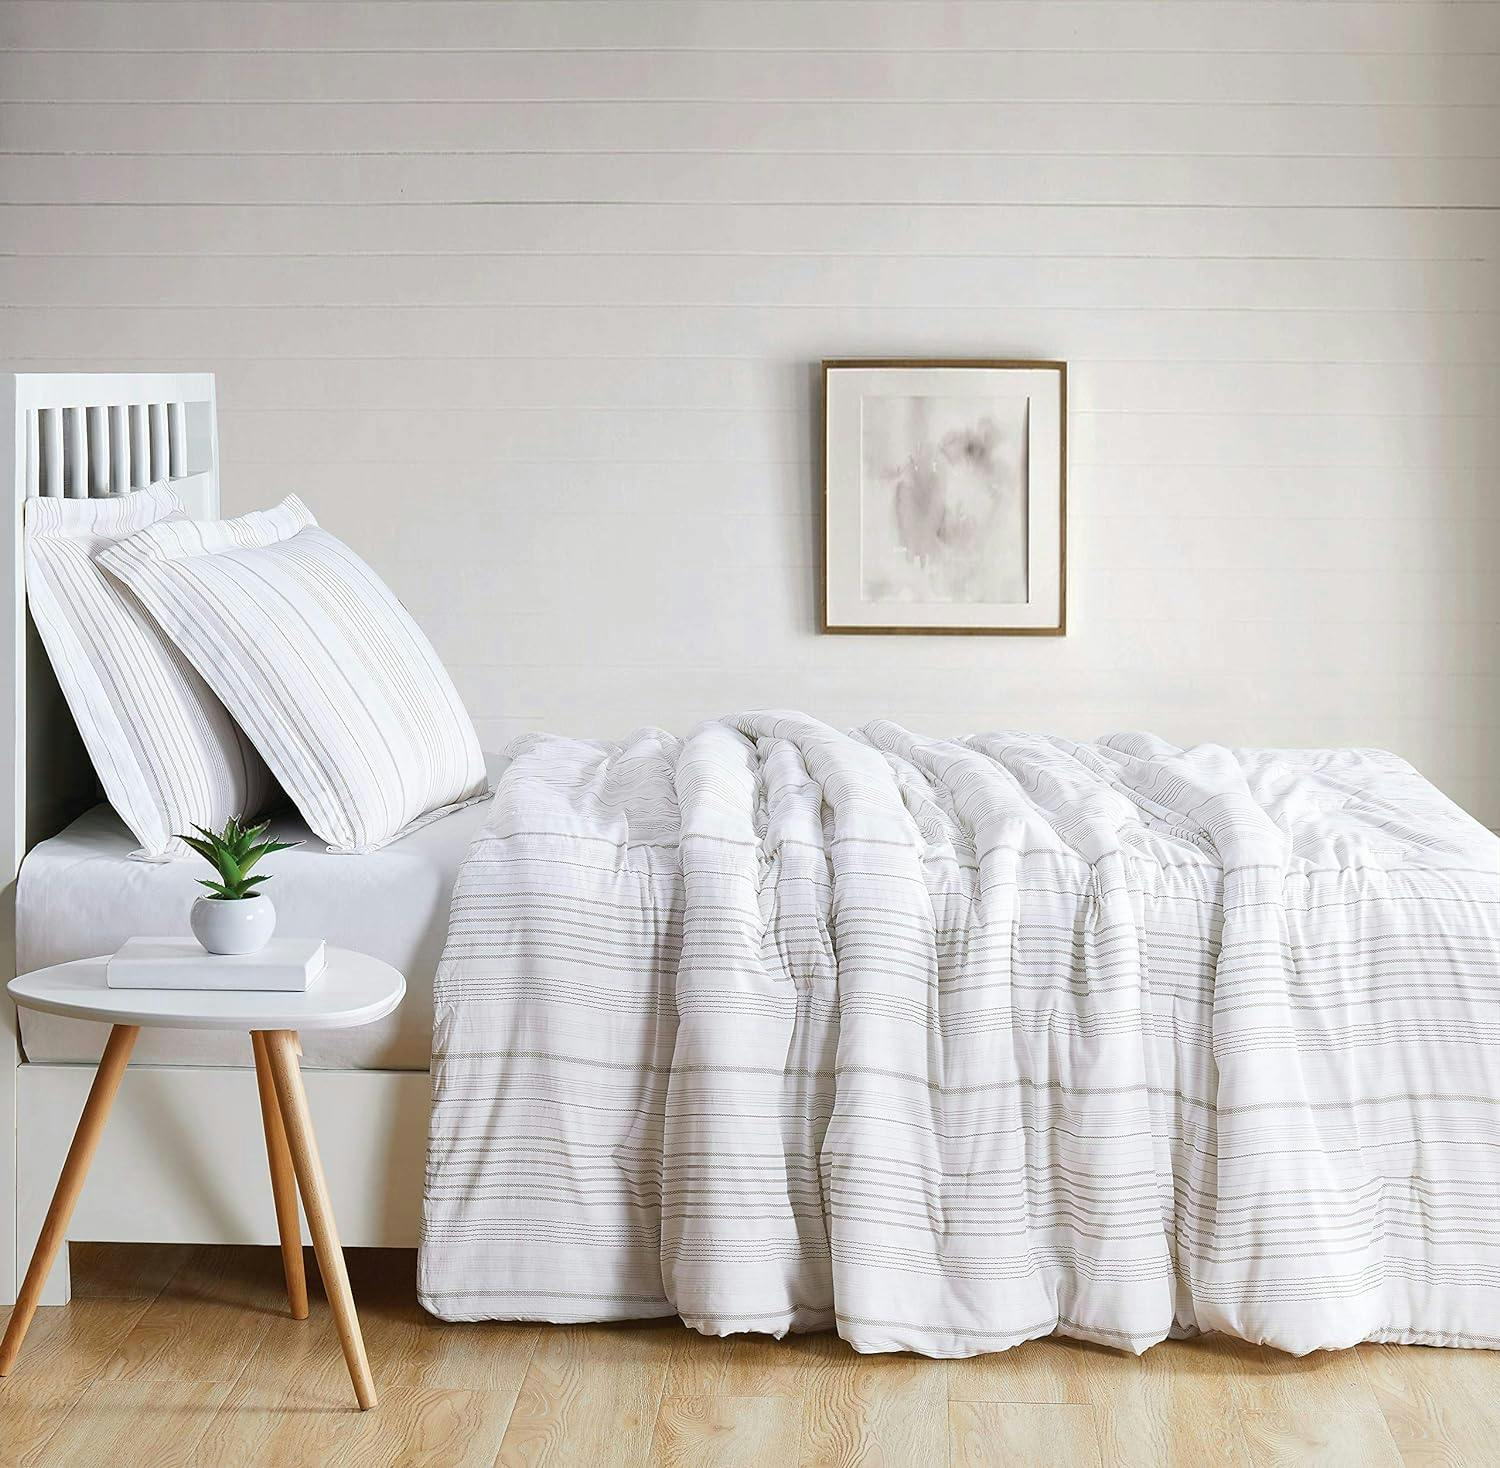 King Size Cotton Comforter Set in White with Reversible Stripe Design